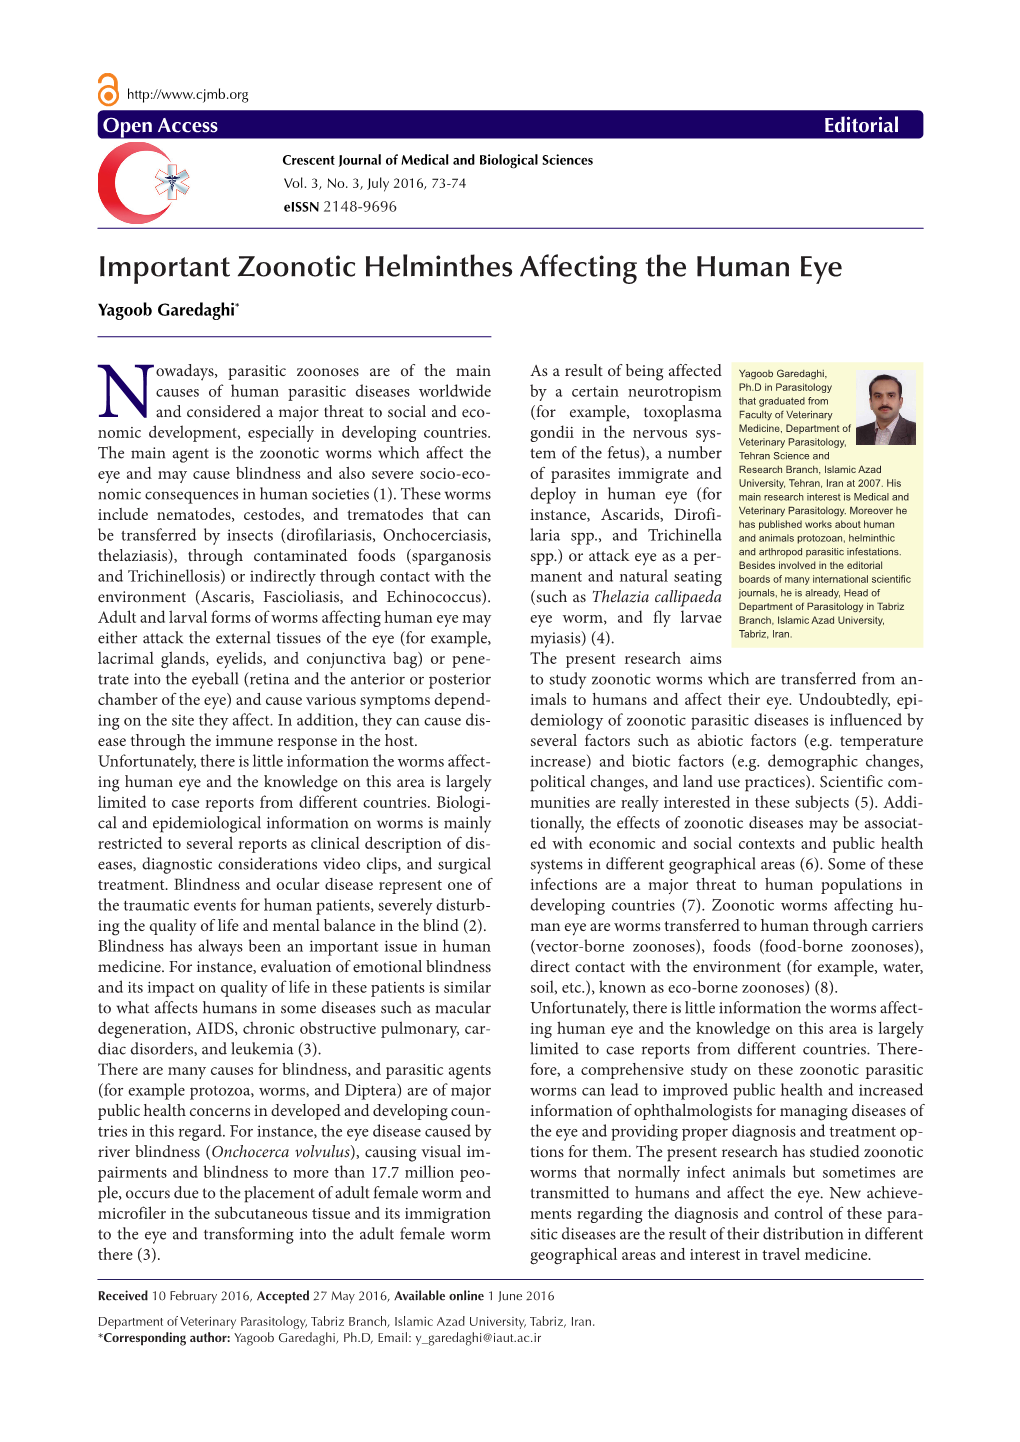 Important Zoonotic Helminthes Affecting the Human Eye